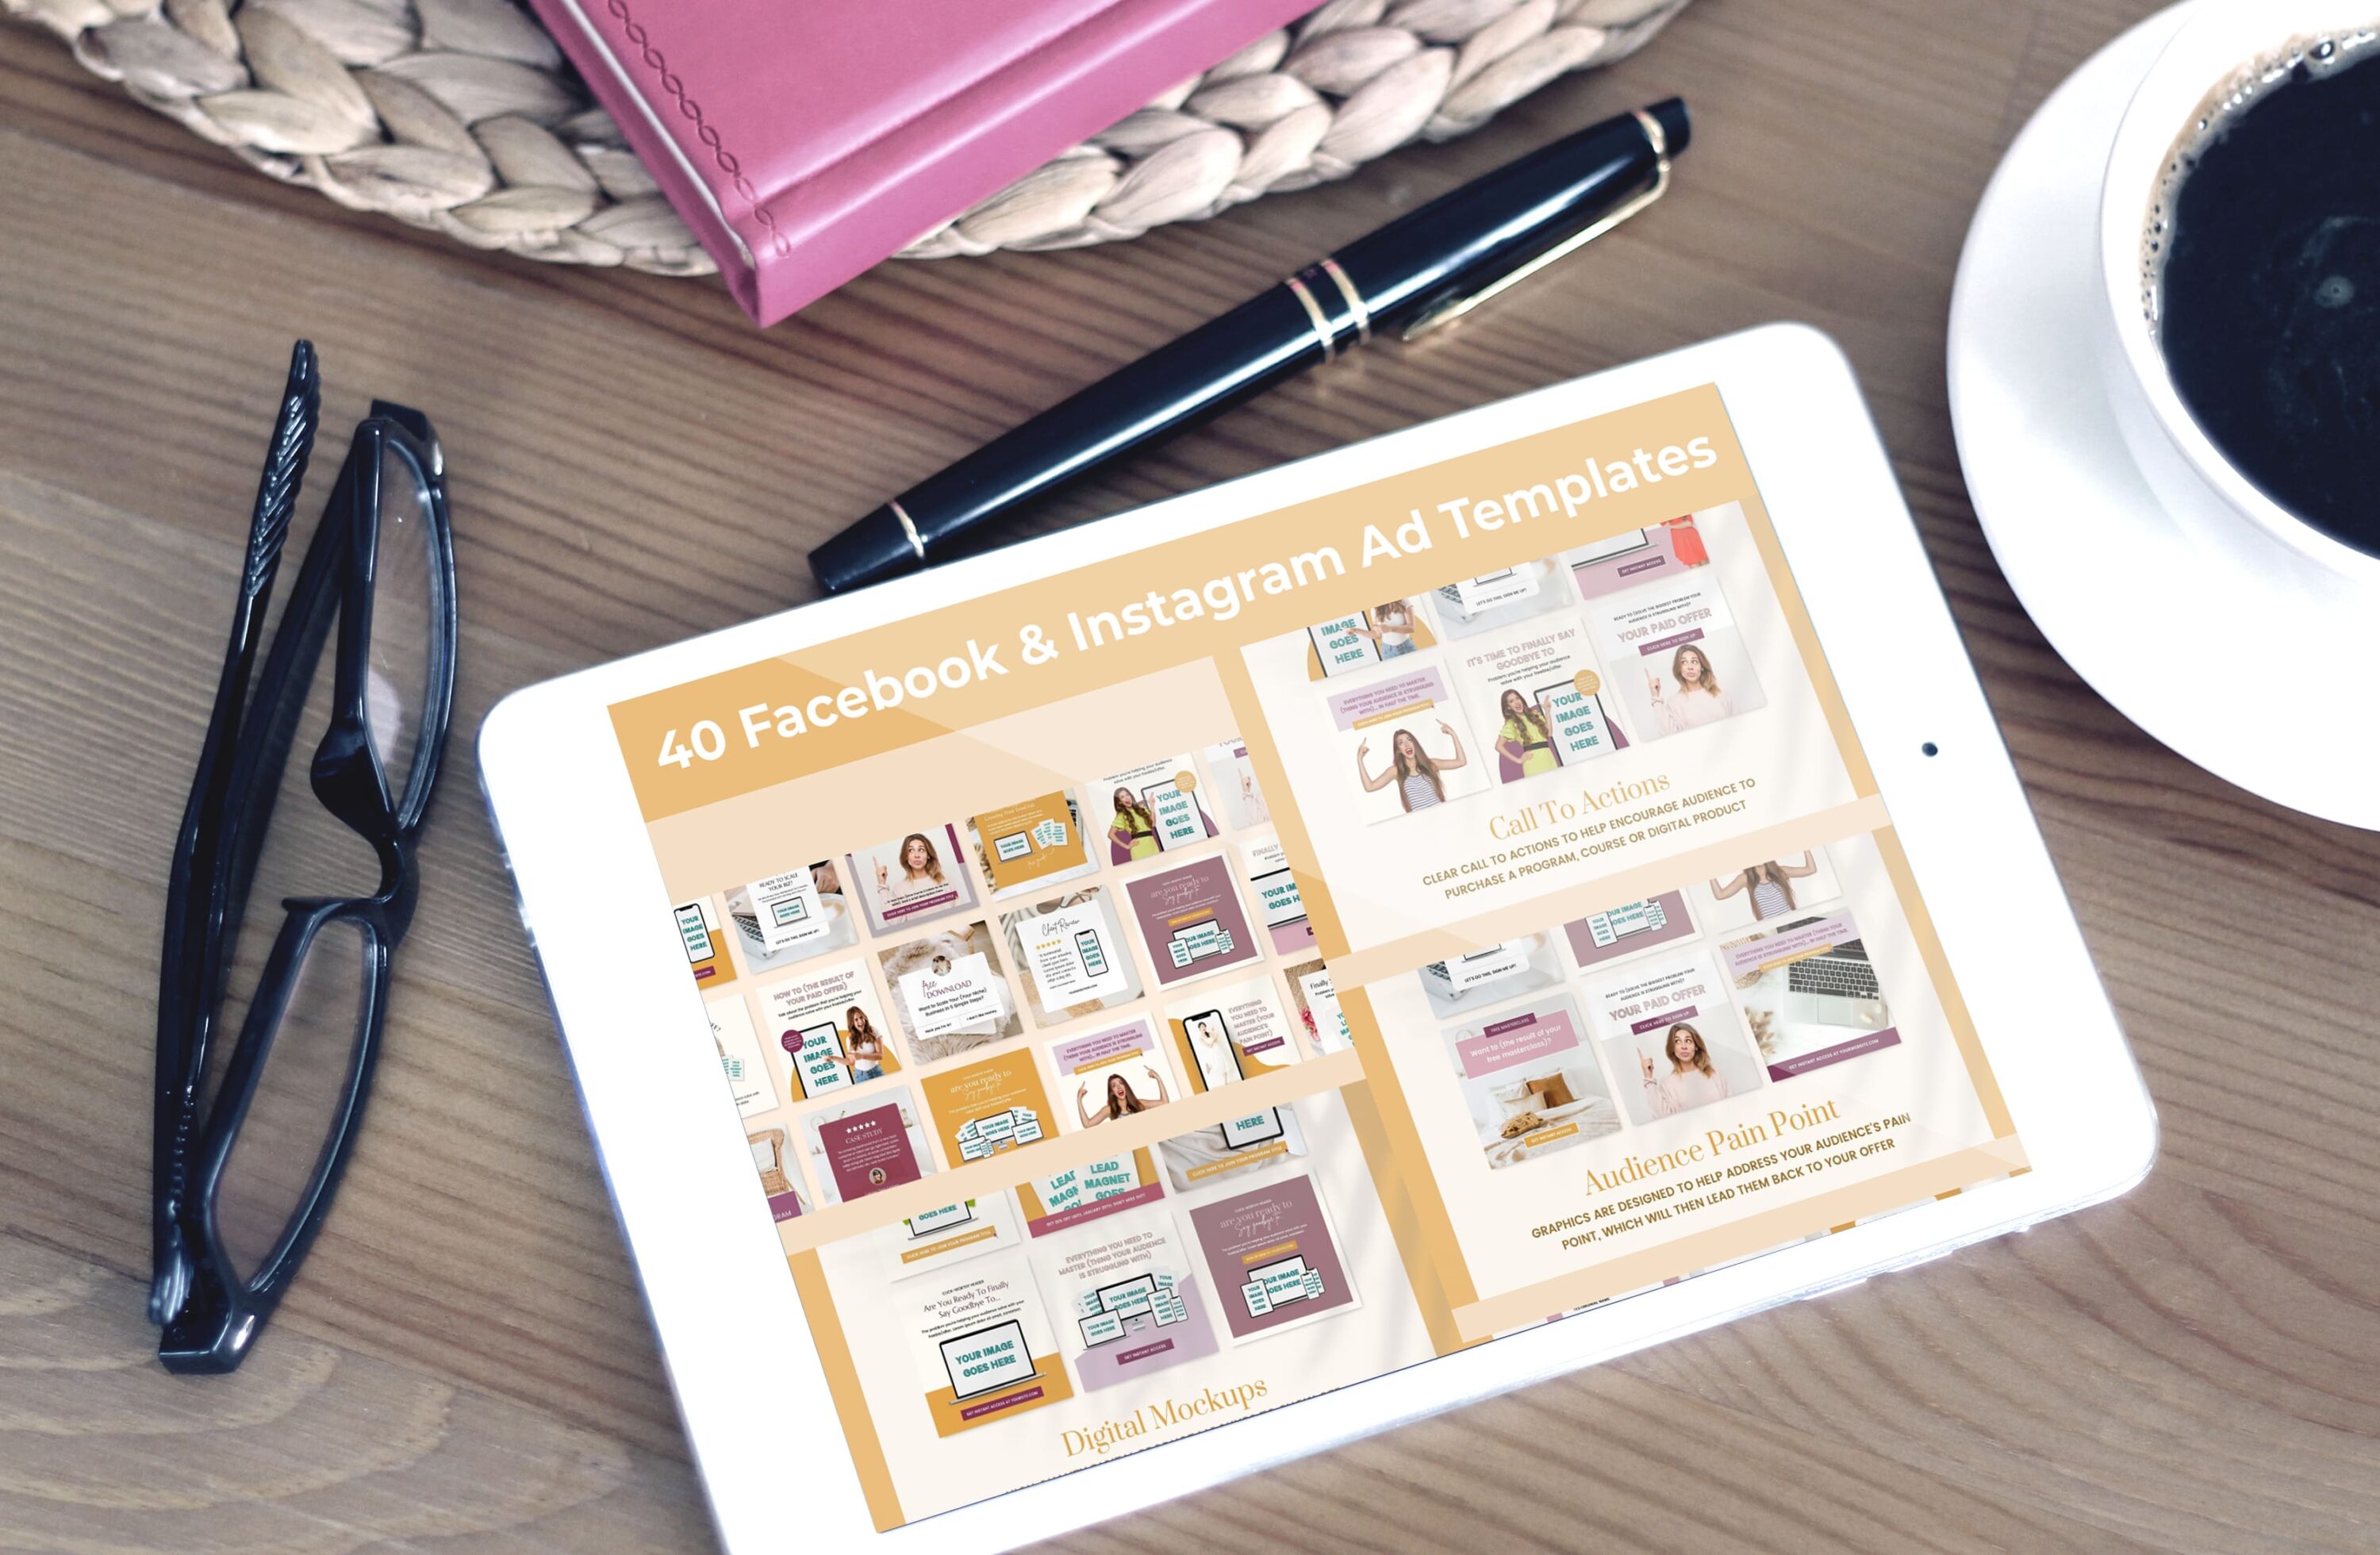 Tablet option of the 40 Facebook & Instagram Ad Templates.